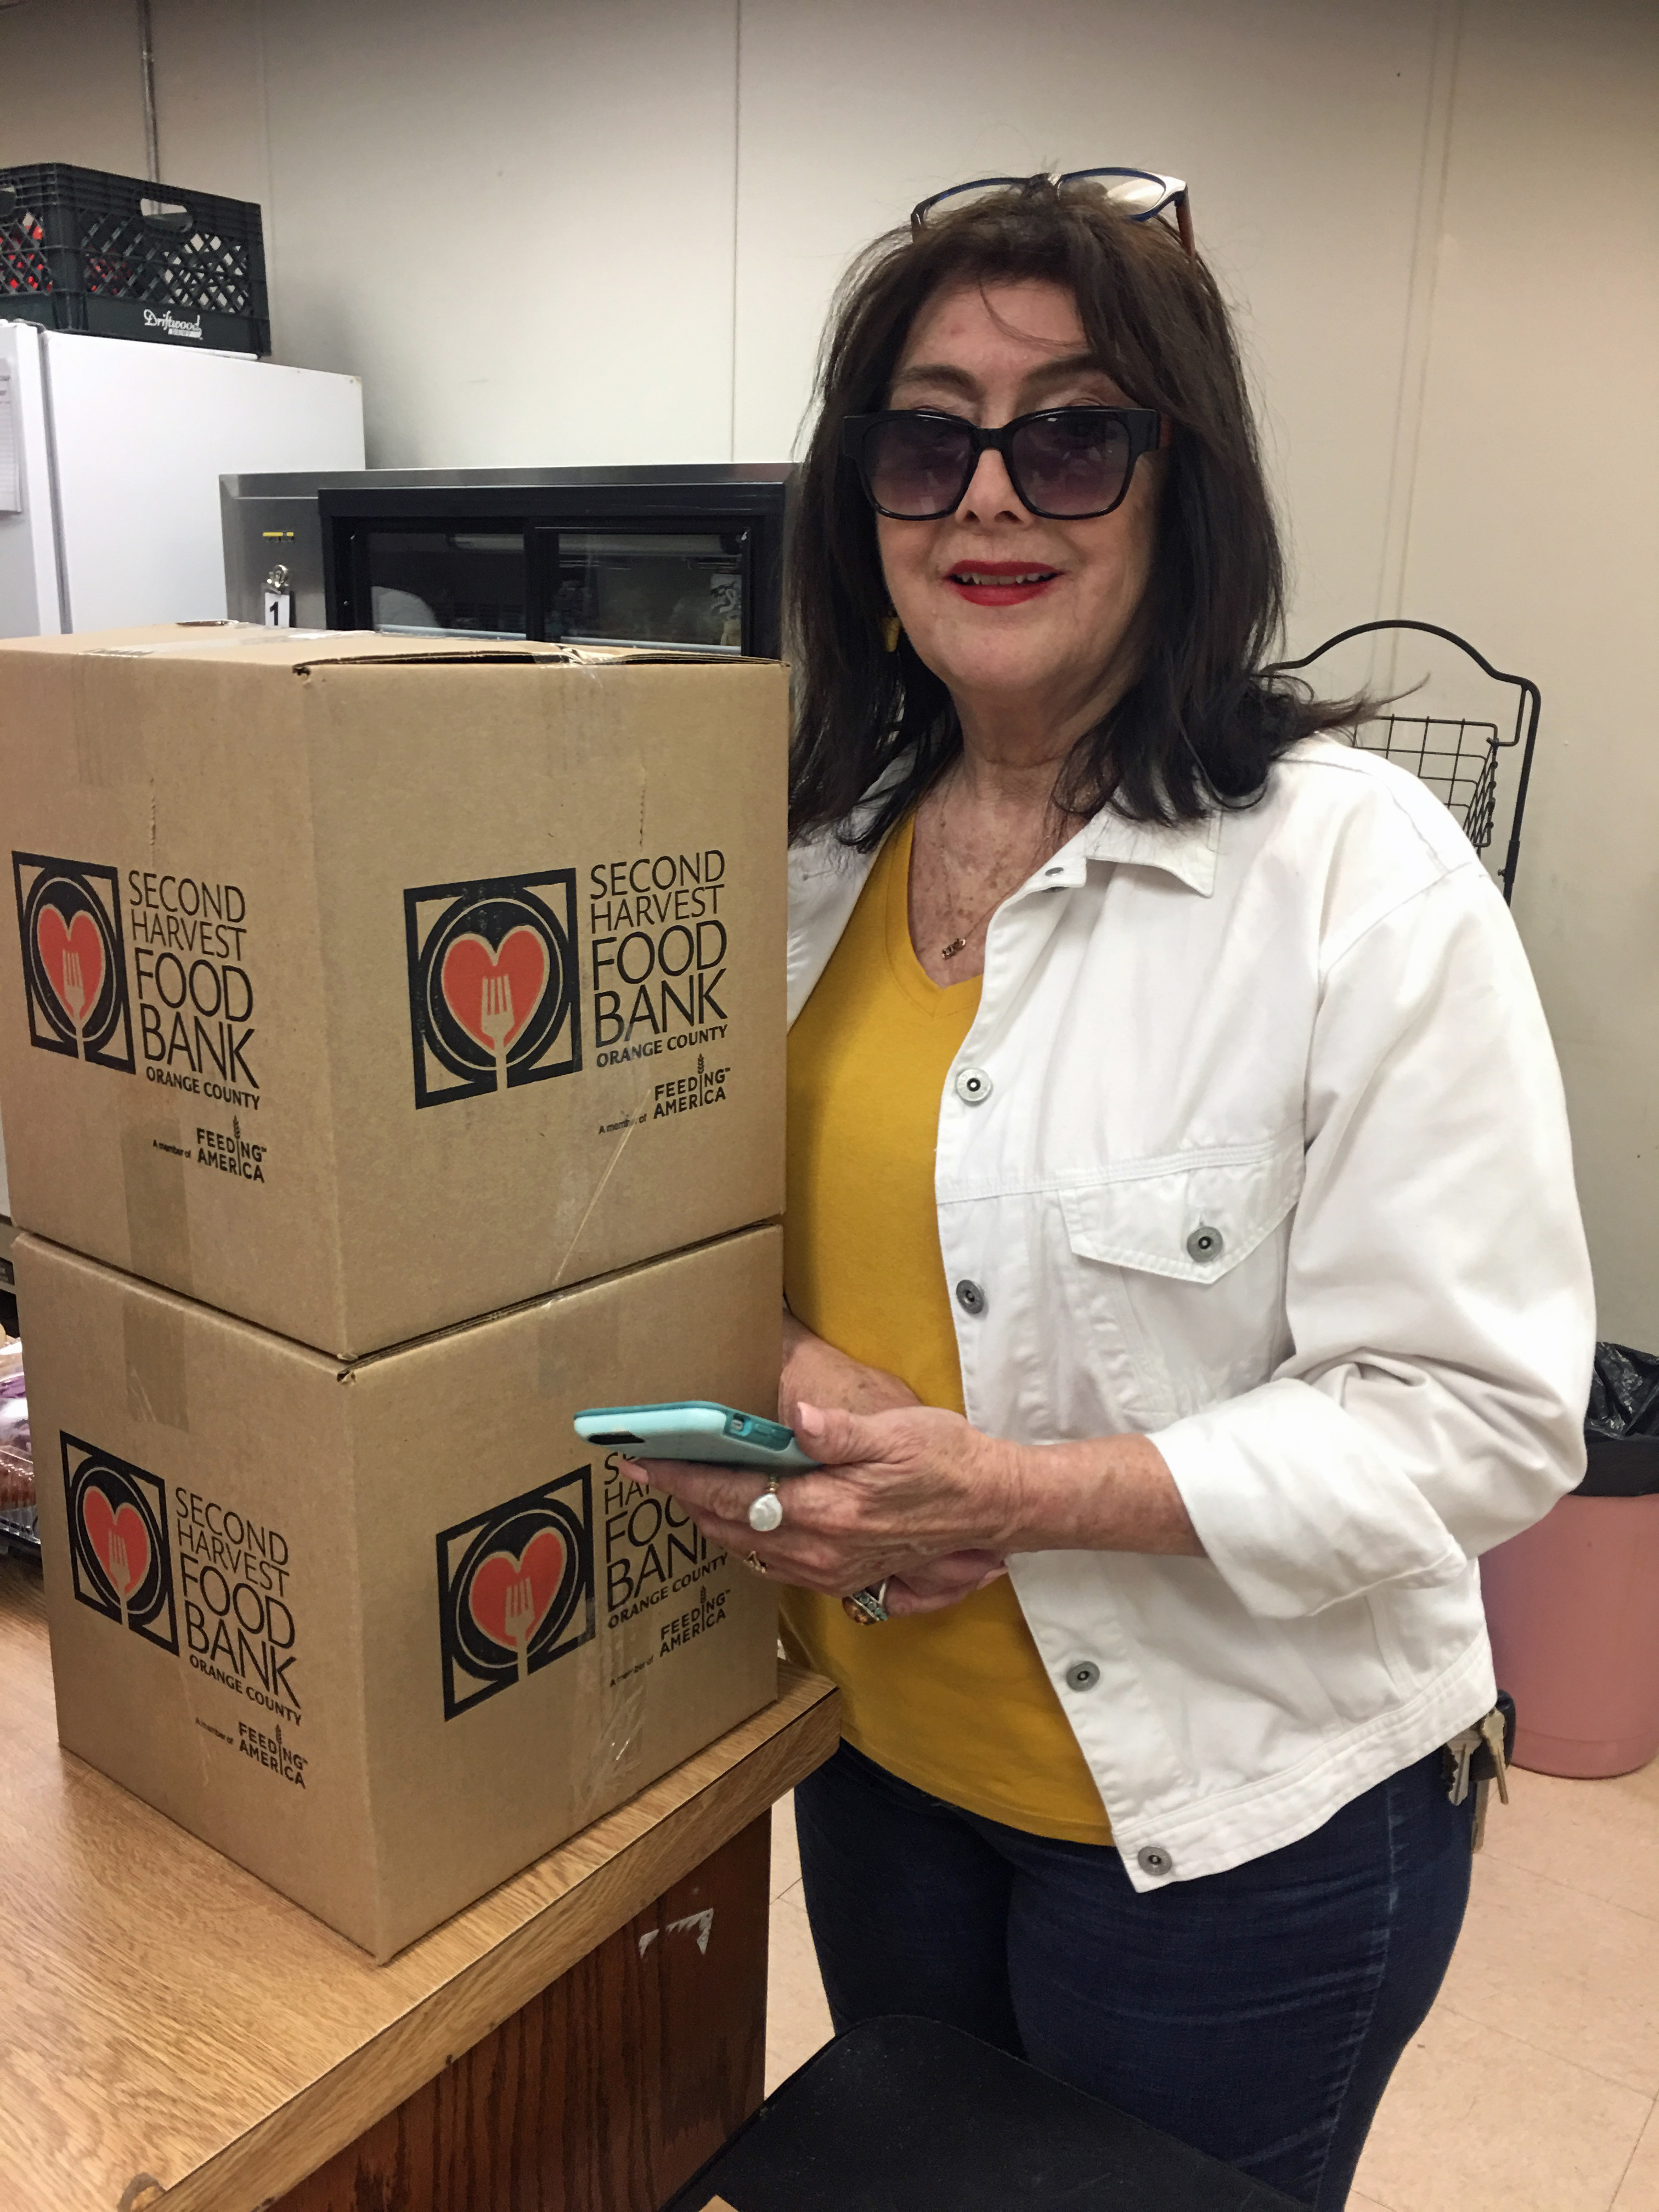 Rose lifts donated food boxes